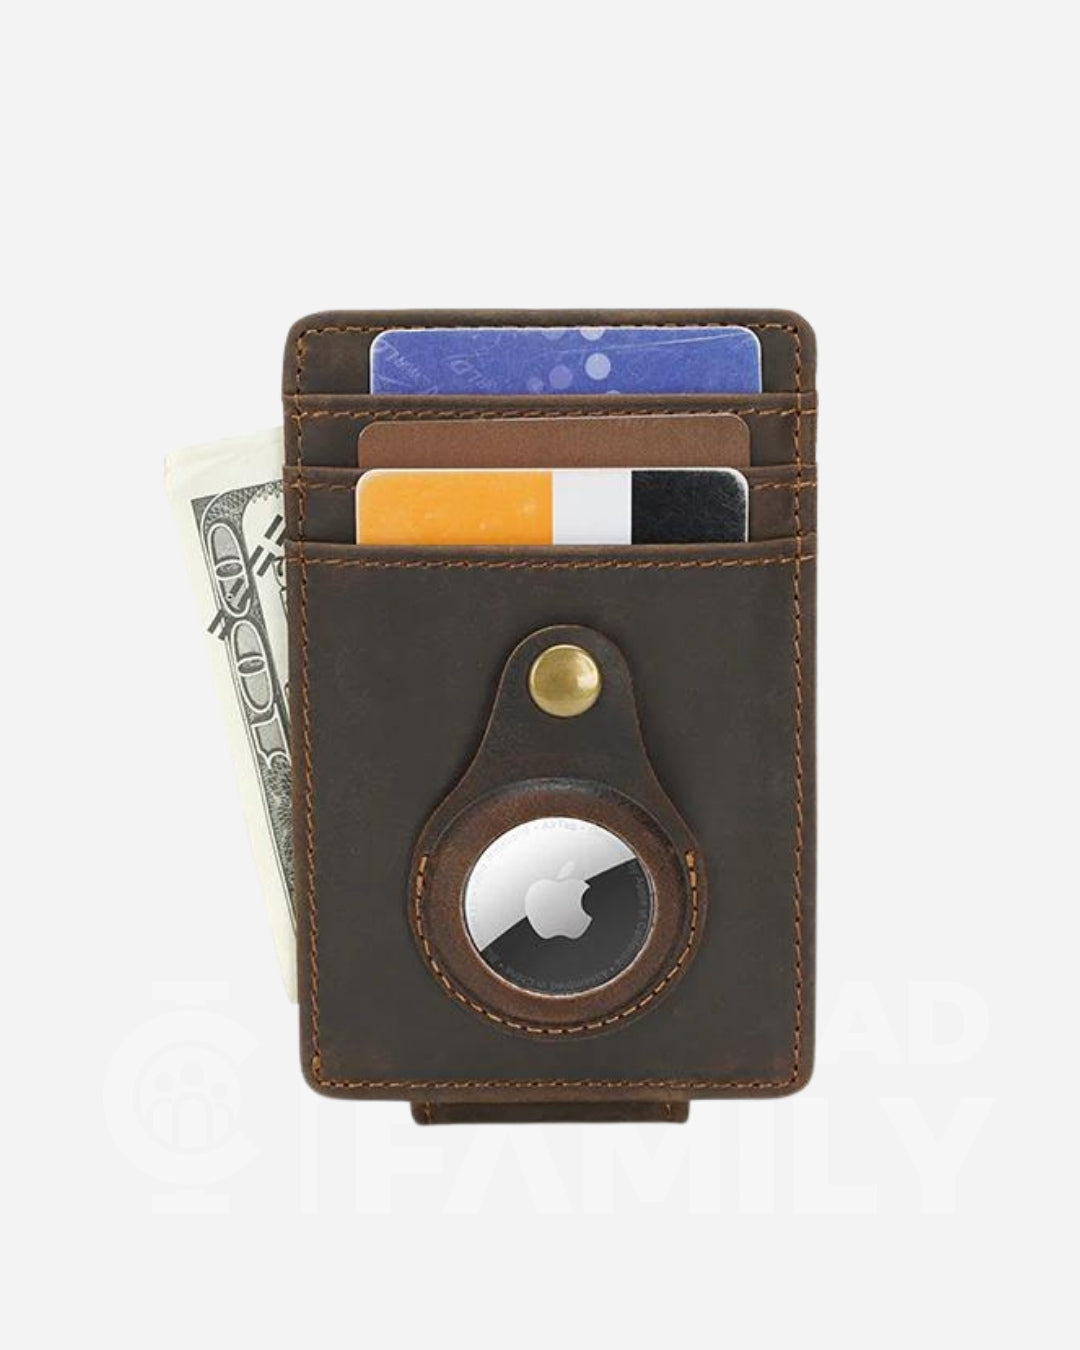 RFID blocking wallet with a credit card compartment and cash storage